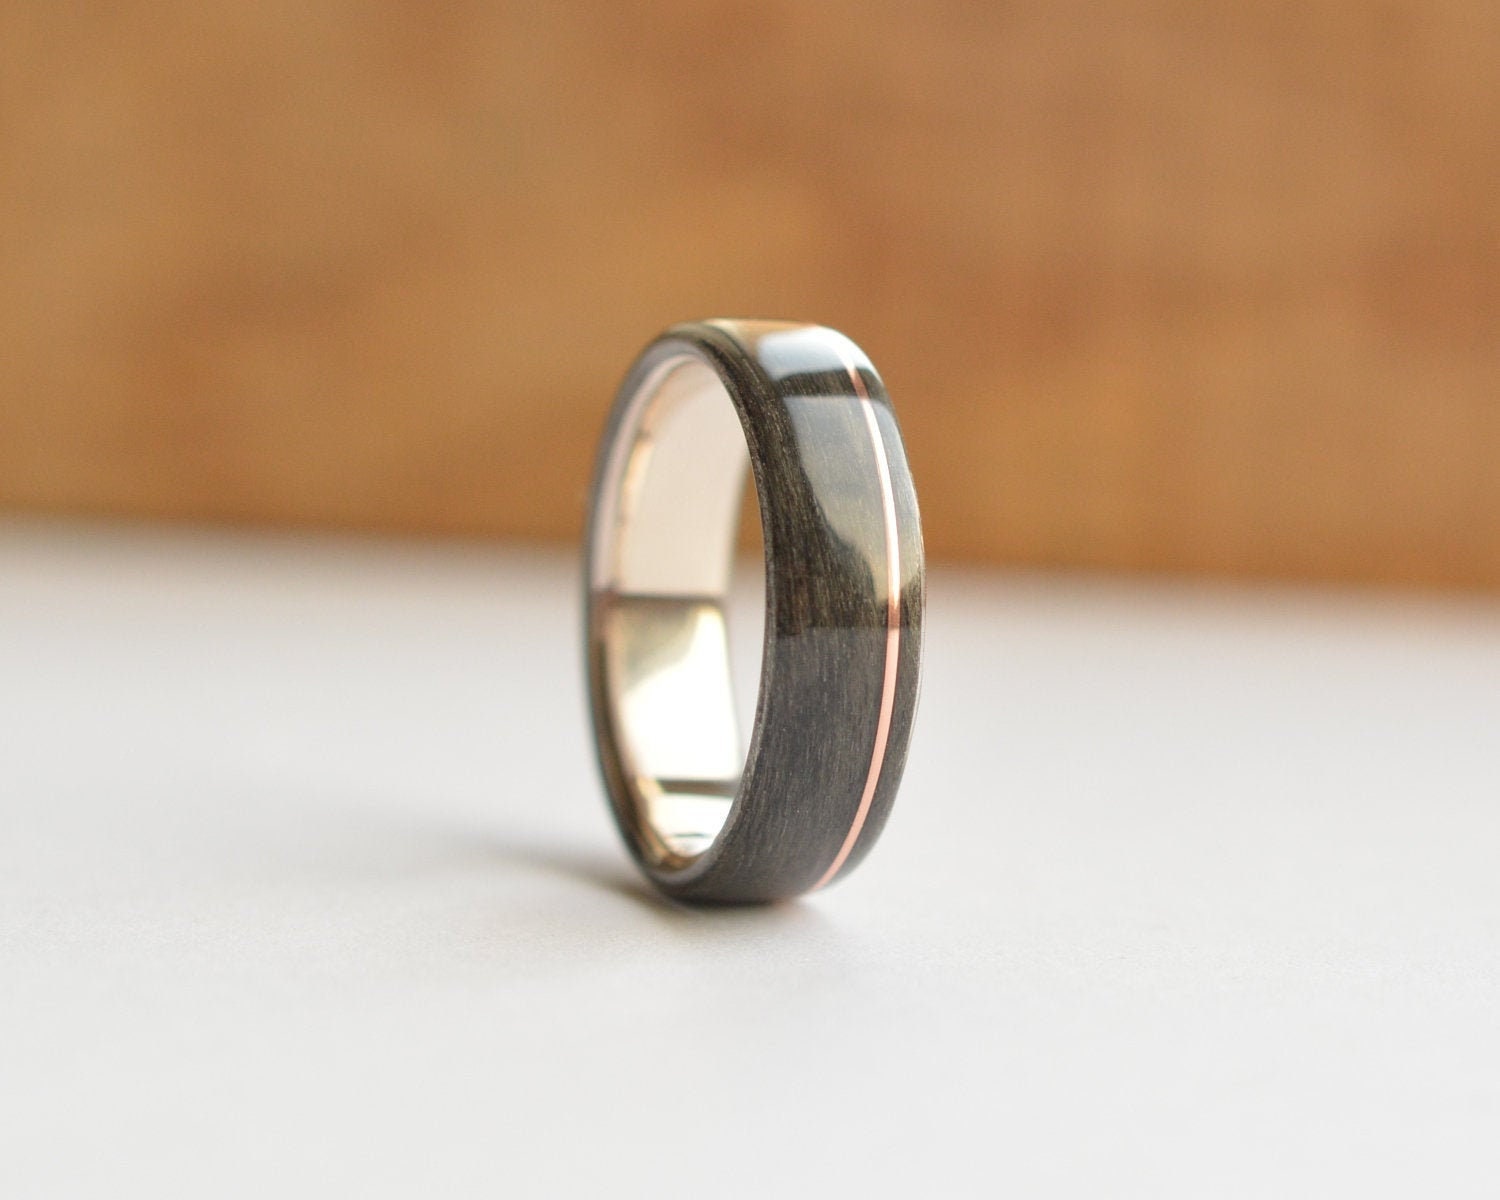 ring- hand made polished grey wooden Copper